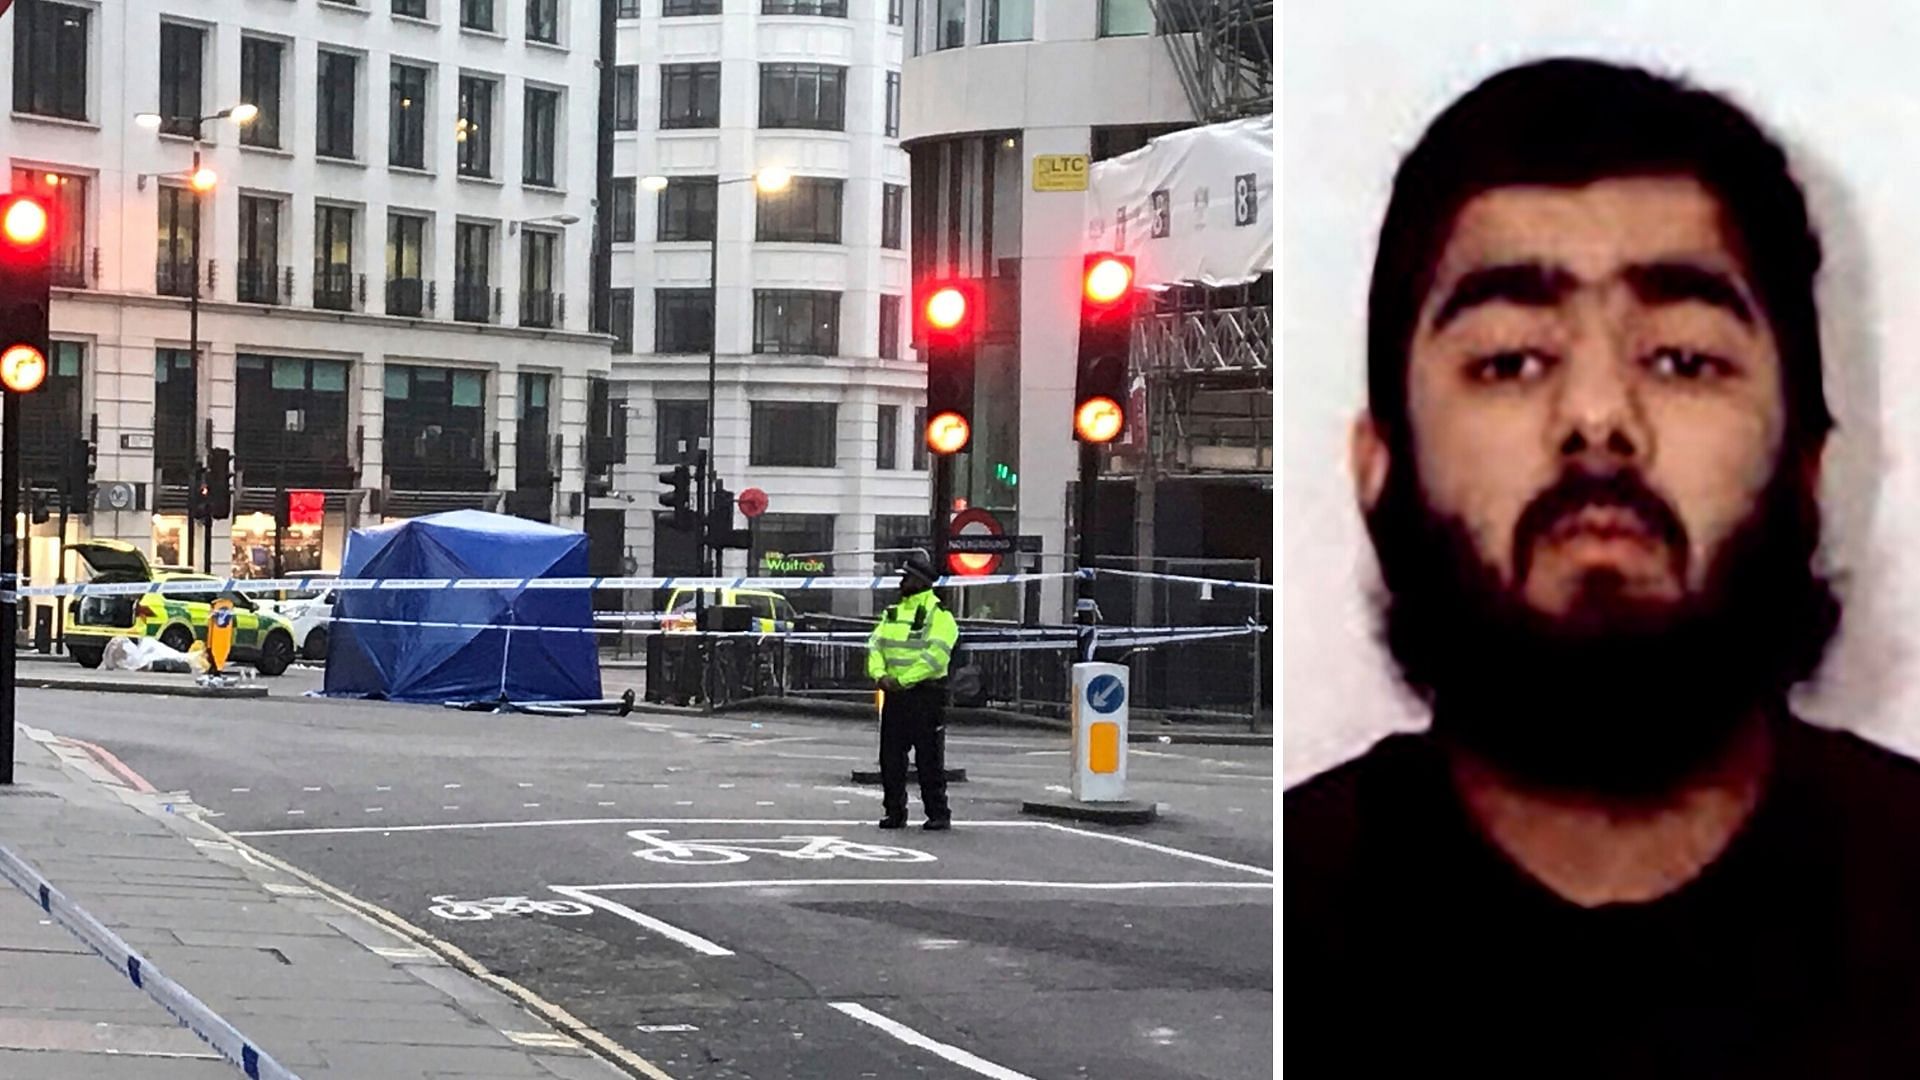 (Left) The area on London bridge where the attack occurred. (Right) A mugshot of Usman Khan.